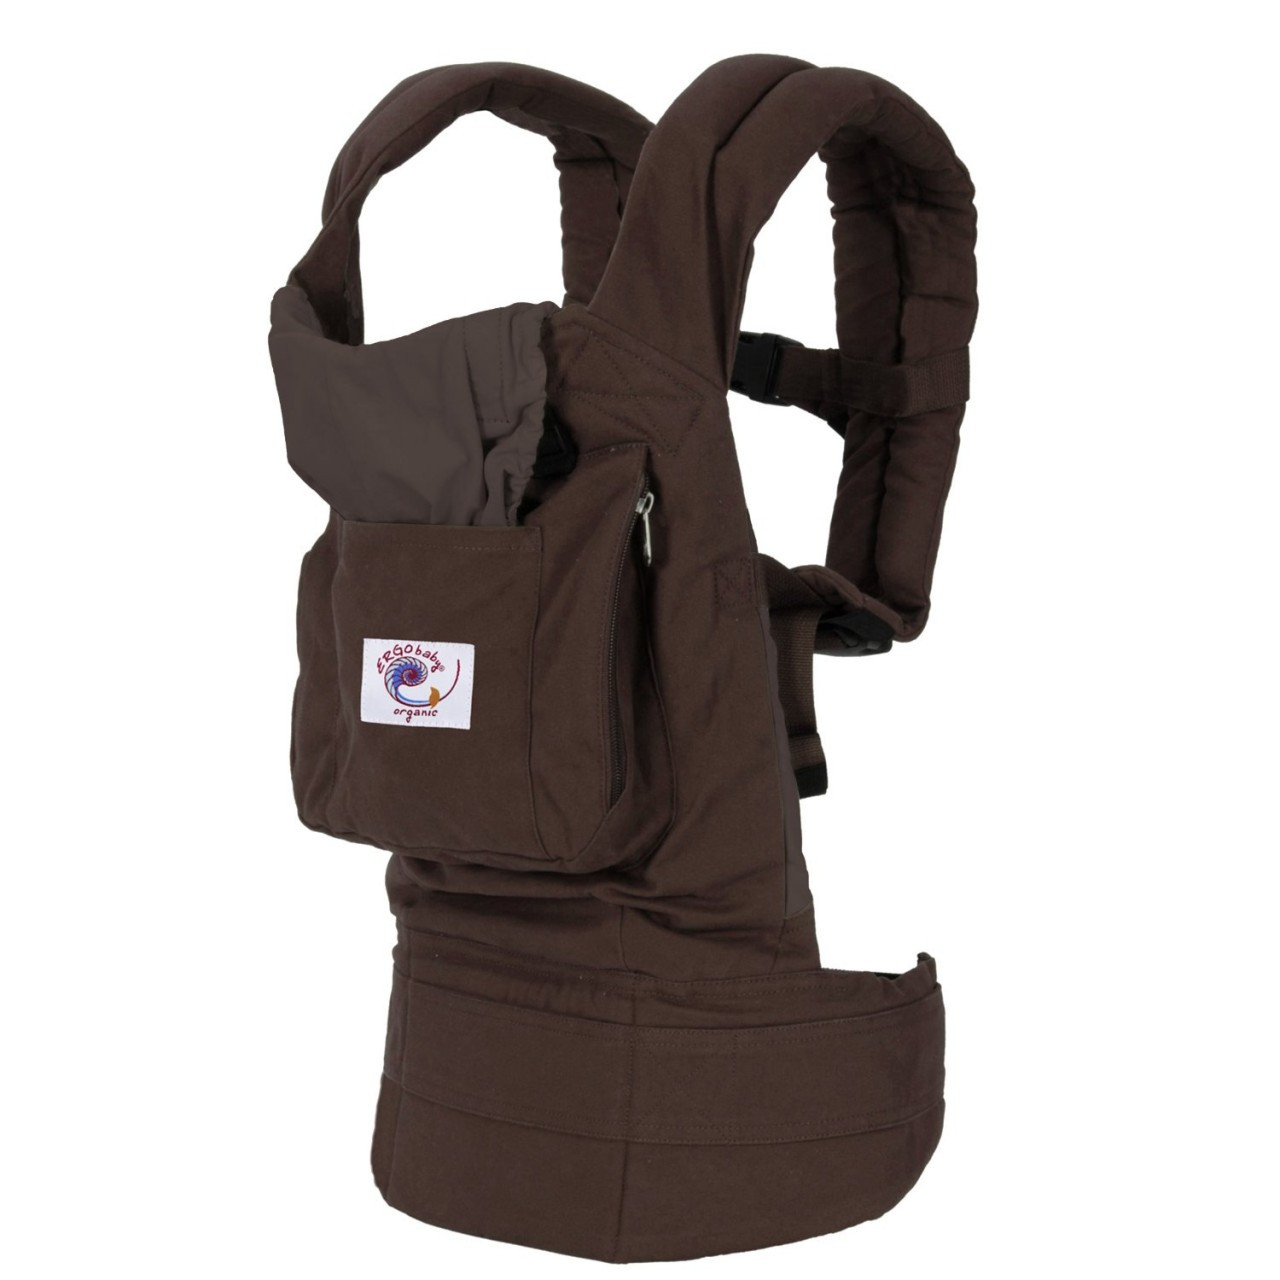 Ergo Chocolate Organic Baby Carrier For Moms